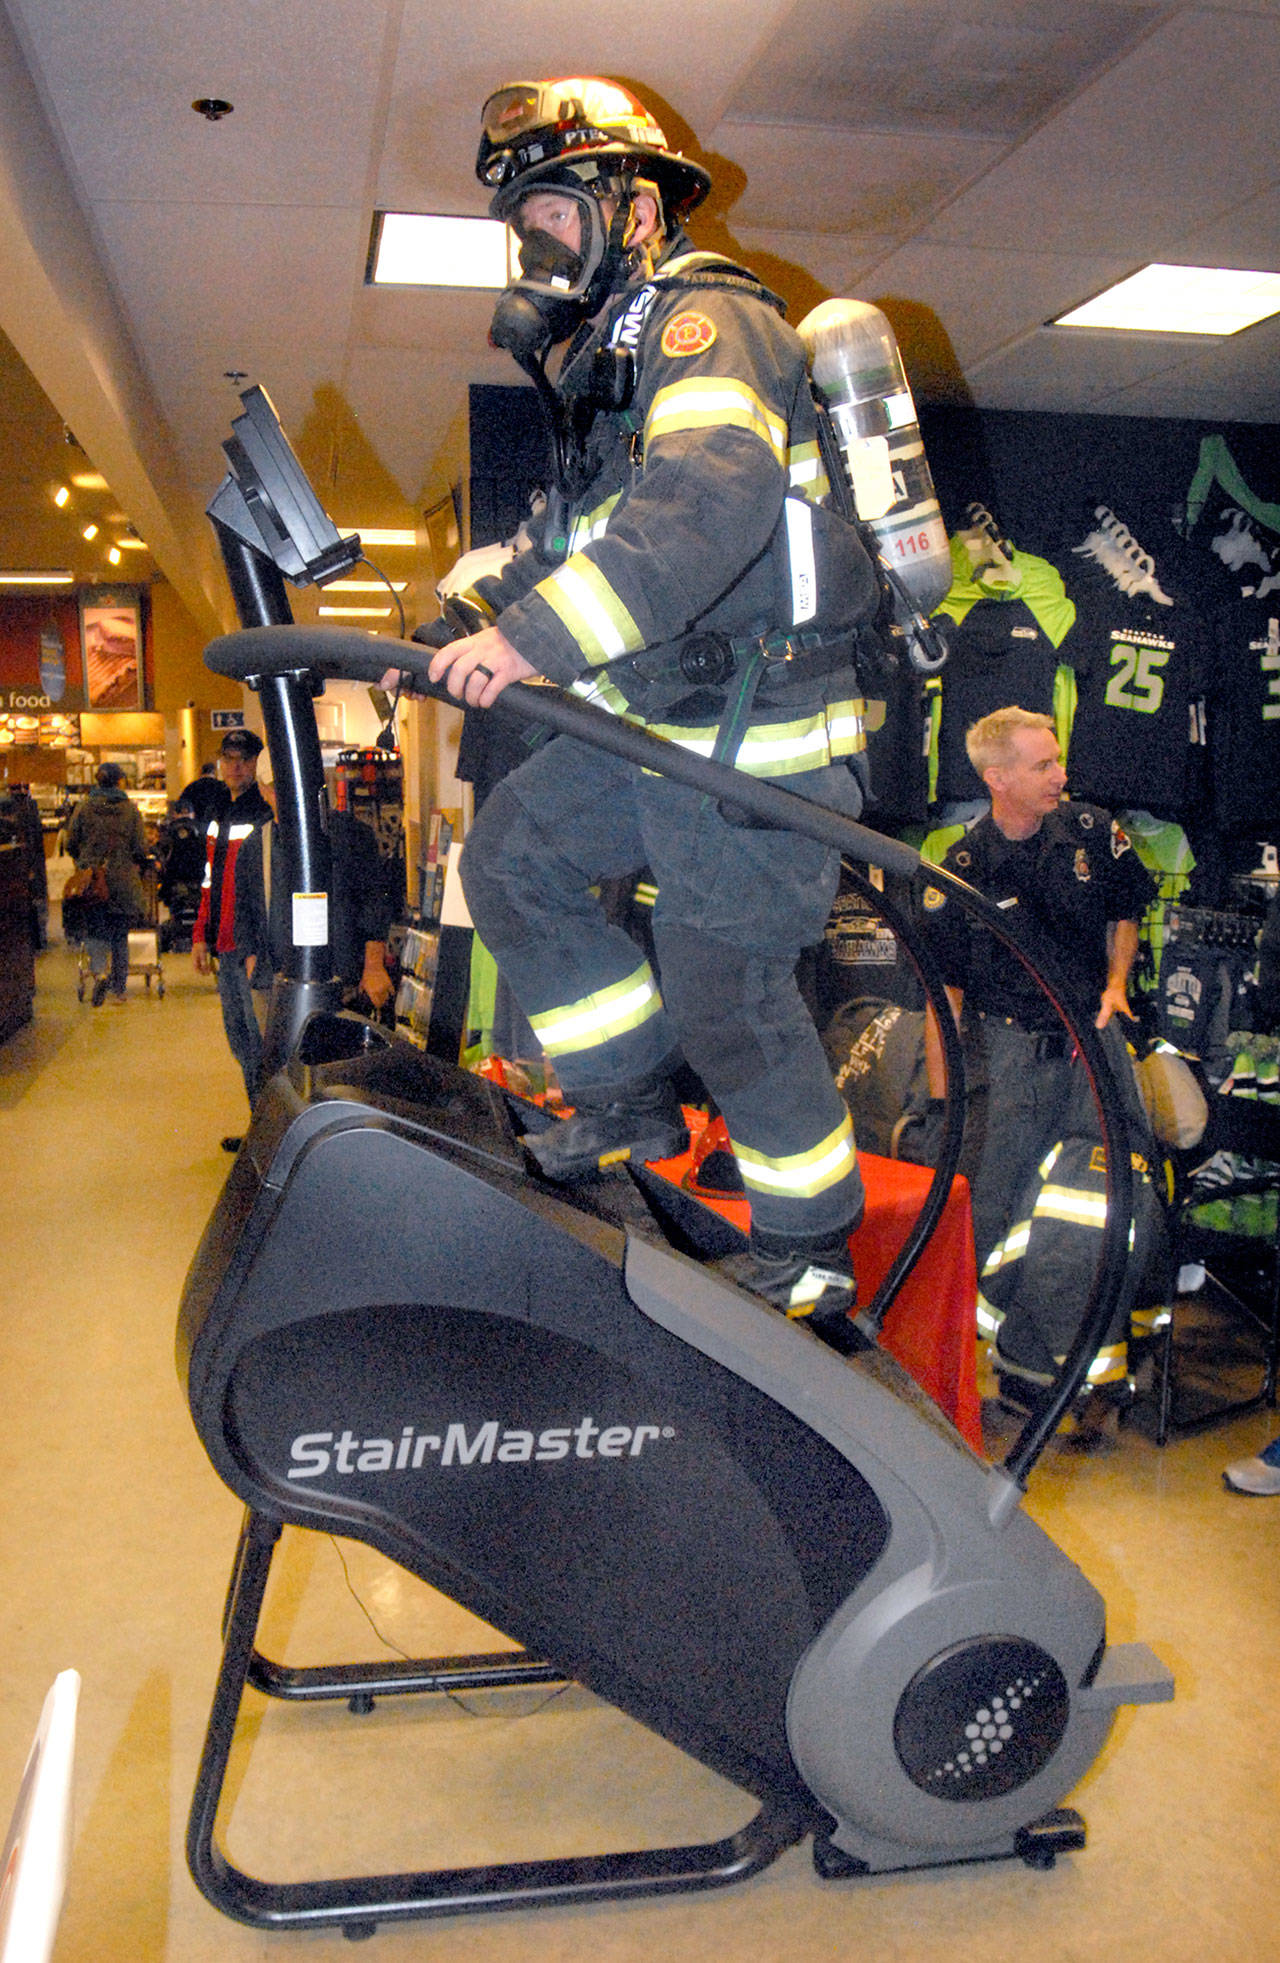 Port Angeles Fire Department Capt. Kelly Ziegler uses a stair-climbing exercise machine during a fundraising event at the Lincoln Street Safeway Food Drug store in Port Angeles on Saturday. A contingent of firefighters from the North Olympic Peninsula plan to take part in the annual Scott Firefighter Stairclimb on March 11 at the Columbia Center in Seattle to benefit the Lukemia Lymphoma Society. (Keith Thorpe/Peninsula Daily News)                                Keith Thorpe/Peninsula Daily News Port Angeles Fire Department Capt. Kelly Ziegler uses a stair-climbing exercise machine during a fund-raising event at the Lincoln Street Safeway Food & Drug store in Port Angeles on Saturday. A contingent of firefighters from the North Olympic Peninsula plan to take part in the annual Scott Firefighter Stairclimb on March 11 at the Columbia Center in Seattle to benefit the Lukemia & Lymphoma Society.